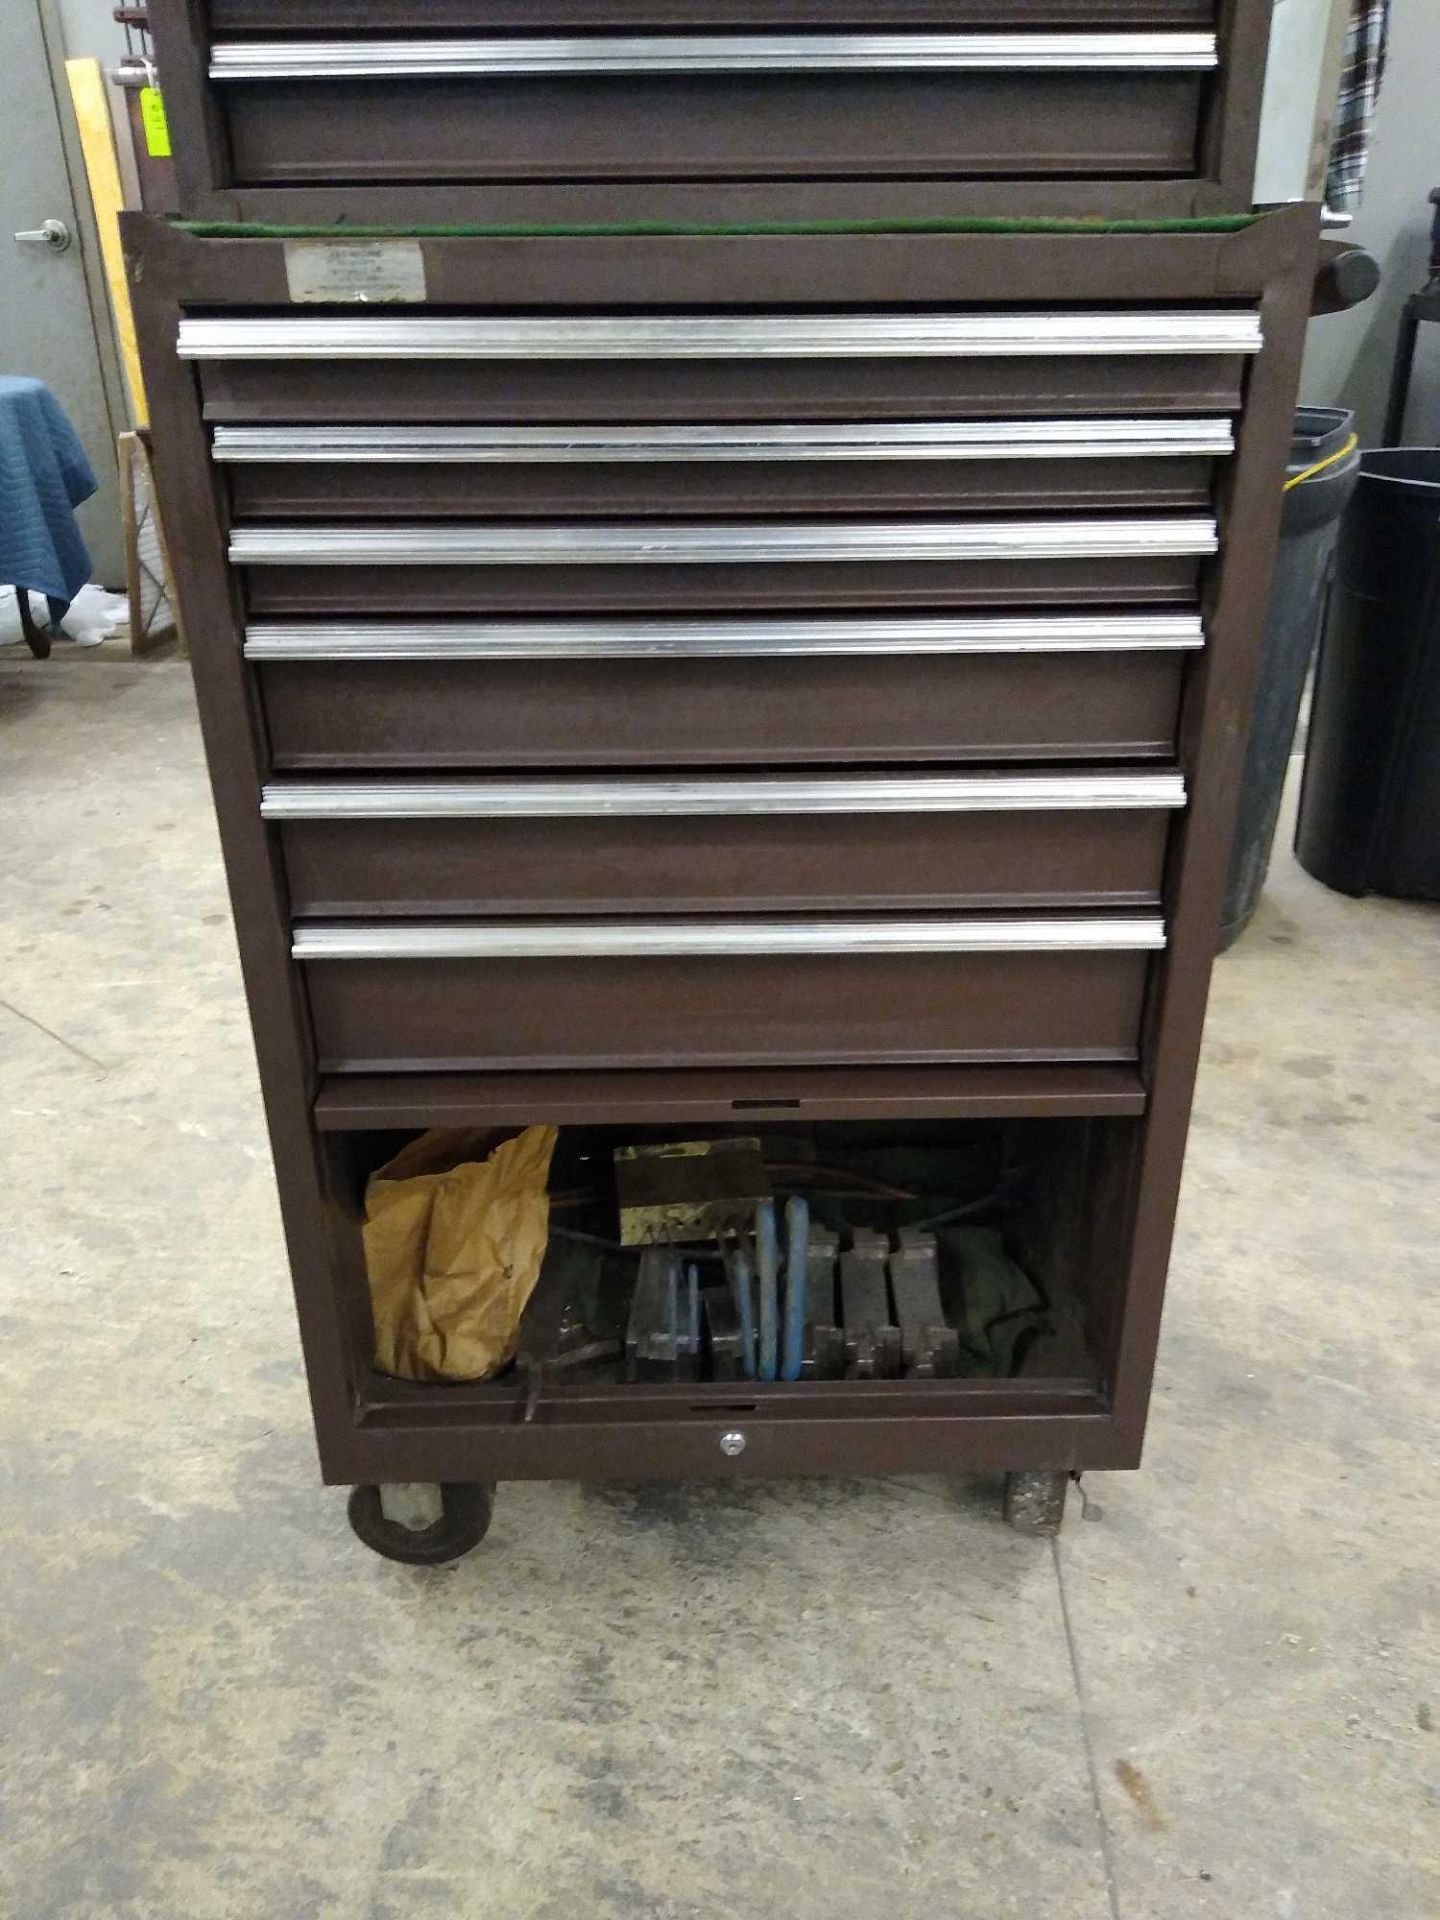 2 Tier Toolbox on Casters with Contents. (1) Toolbox 10 Drawers 26" x 13.5" x 18" (1) Toolbox 6 Draw - Image 16 of 24